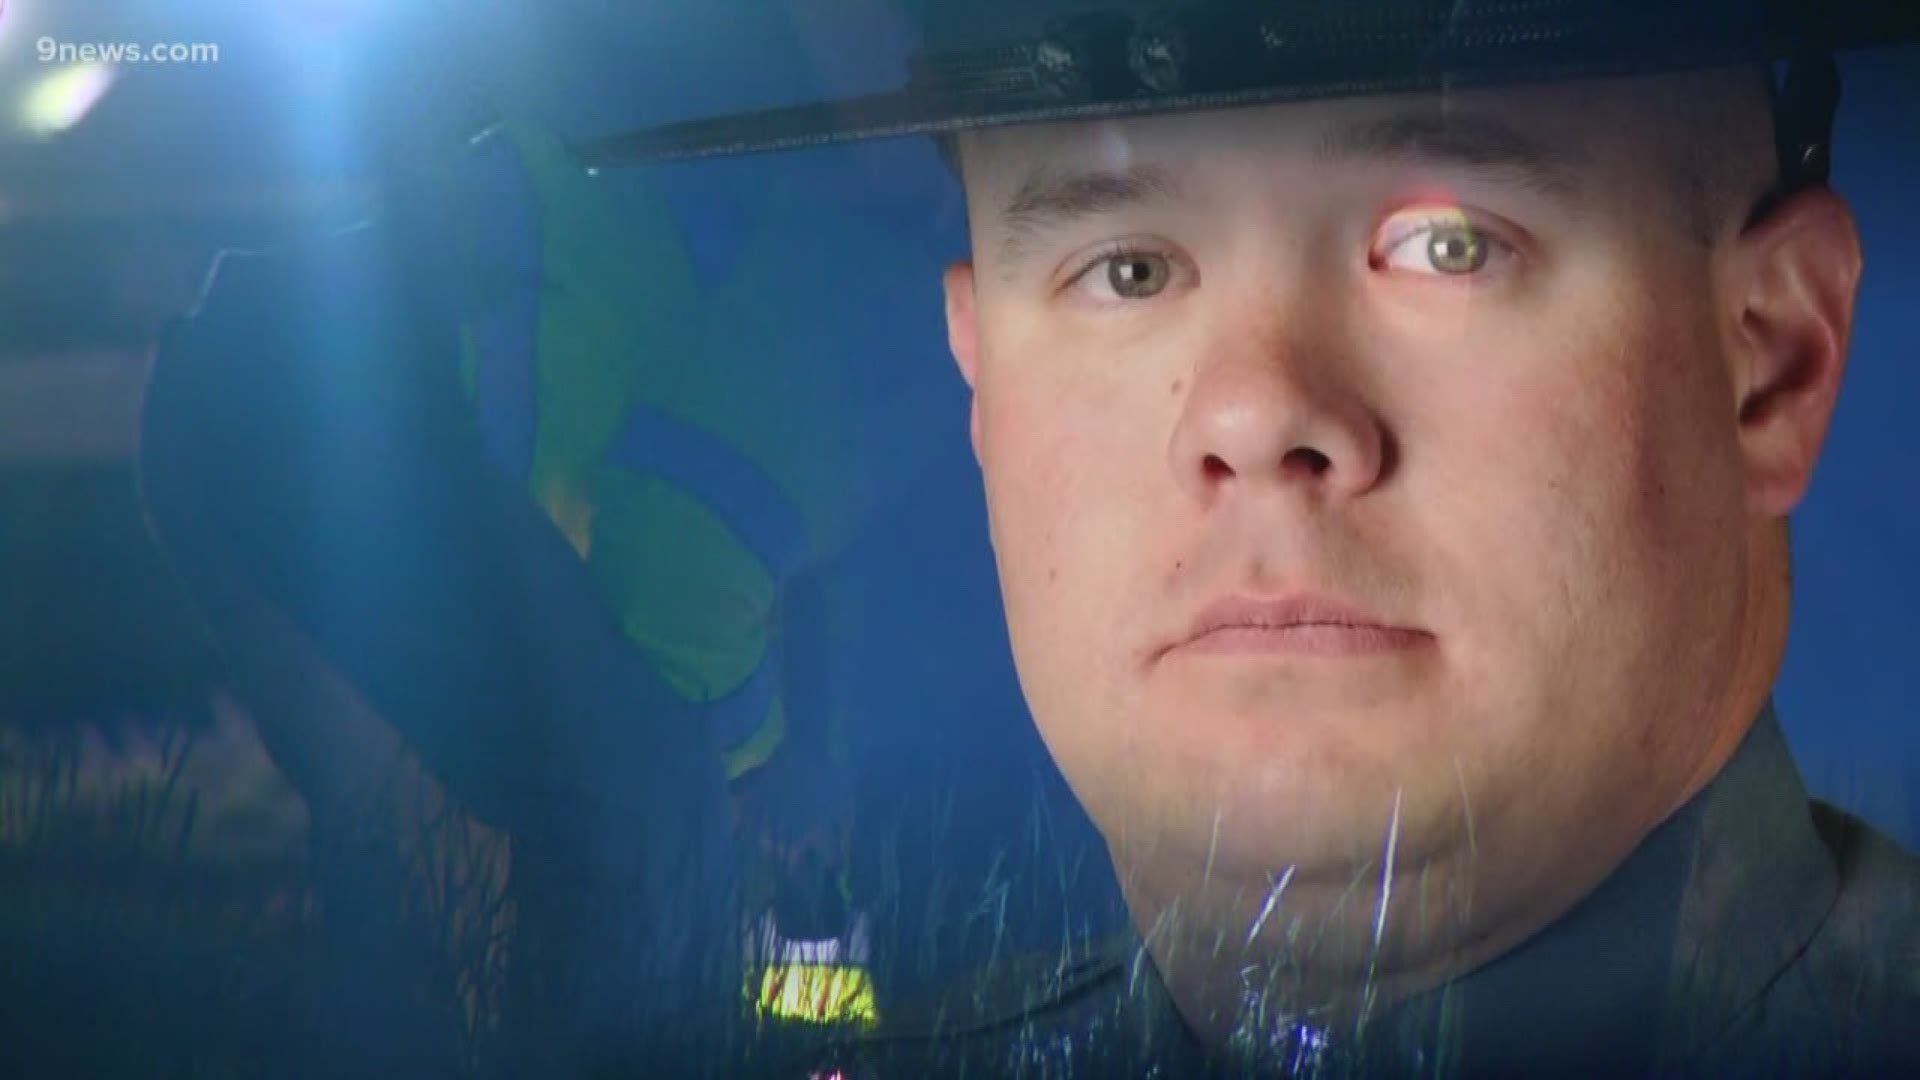 Troopers, family, friends, and the community will honor the life of Trooper William Modén this morning. He died last Friday night when a car hit him on I-70 as he was working another crash